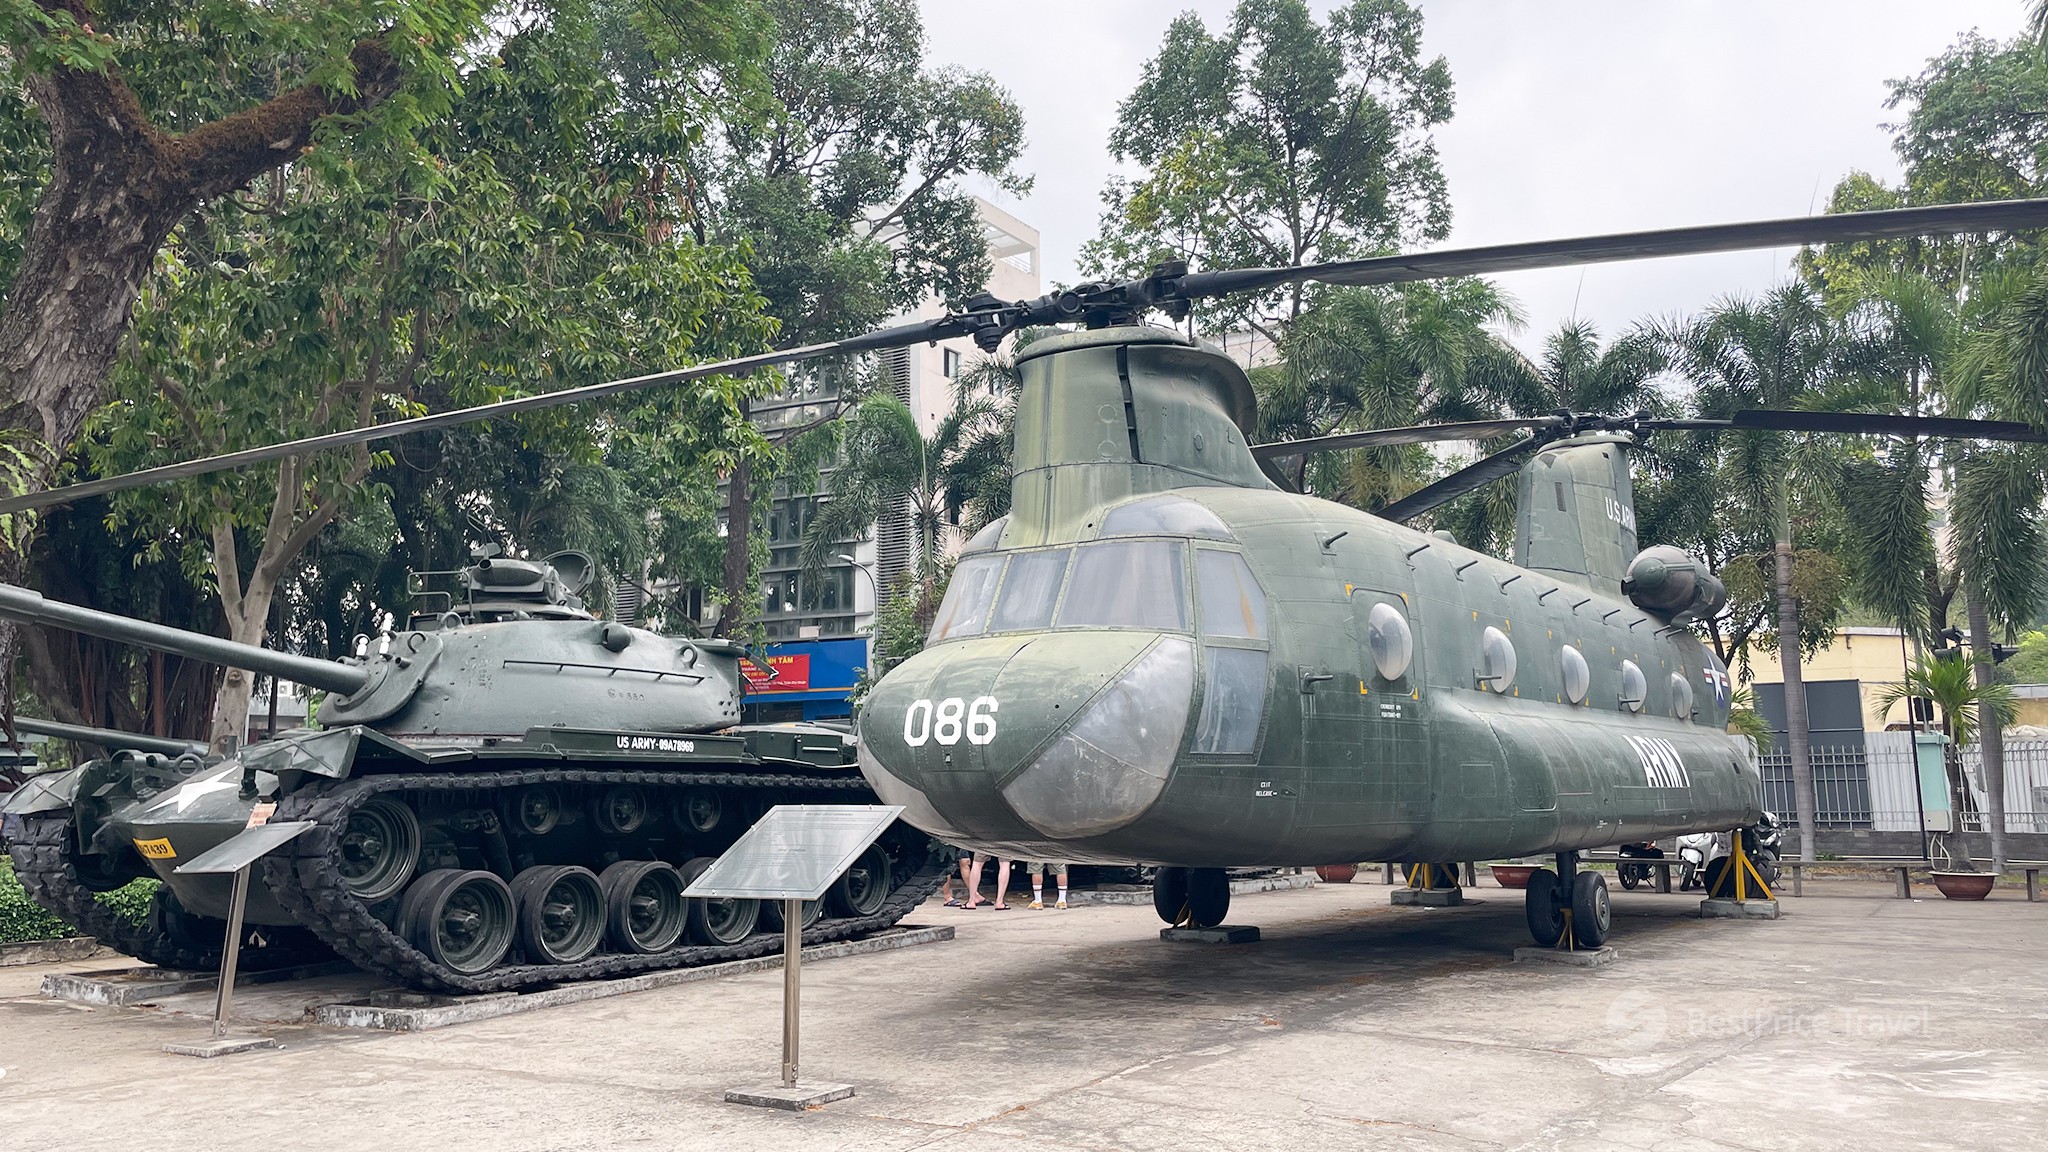 Day 11 Learn Vietnamese History At War Remnants Museum